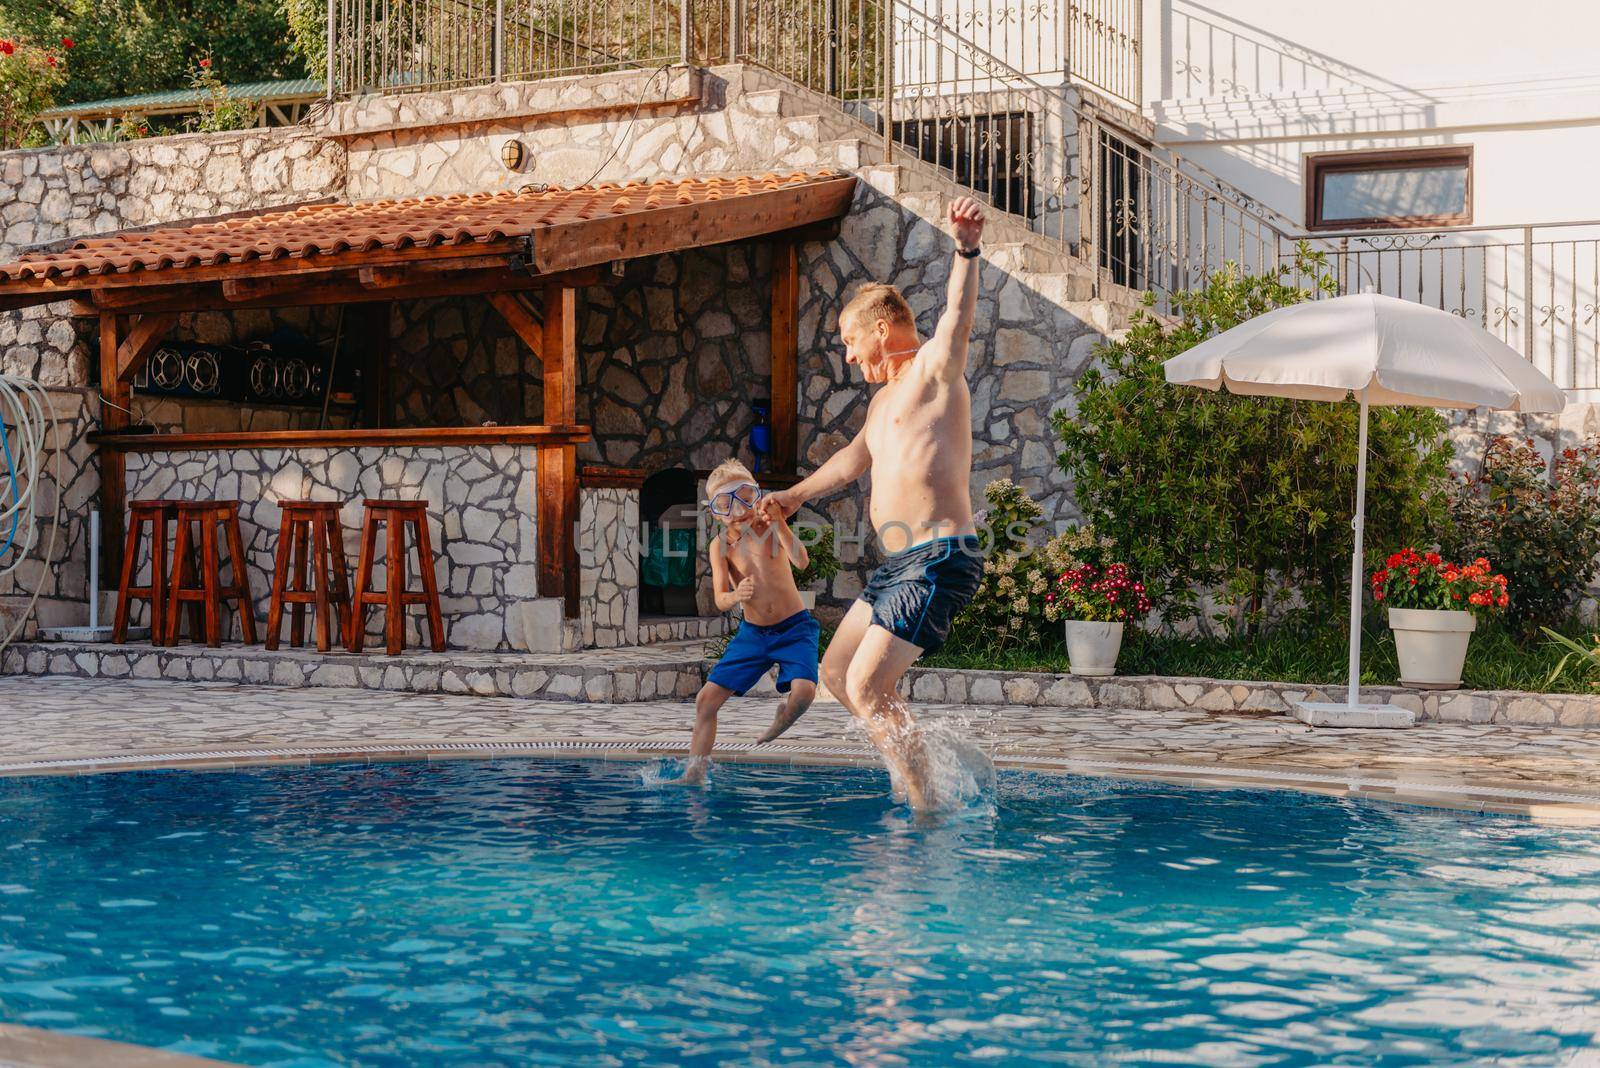 Excited boy in googles jumping in water from shoulders of his father standing in swimming pool by Andrii_Ko